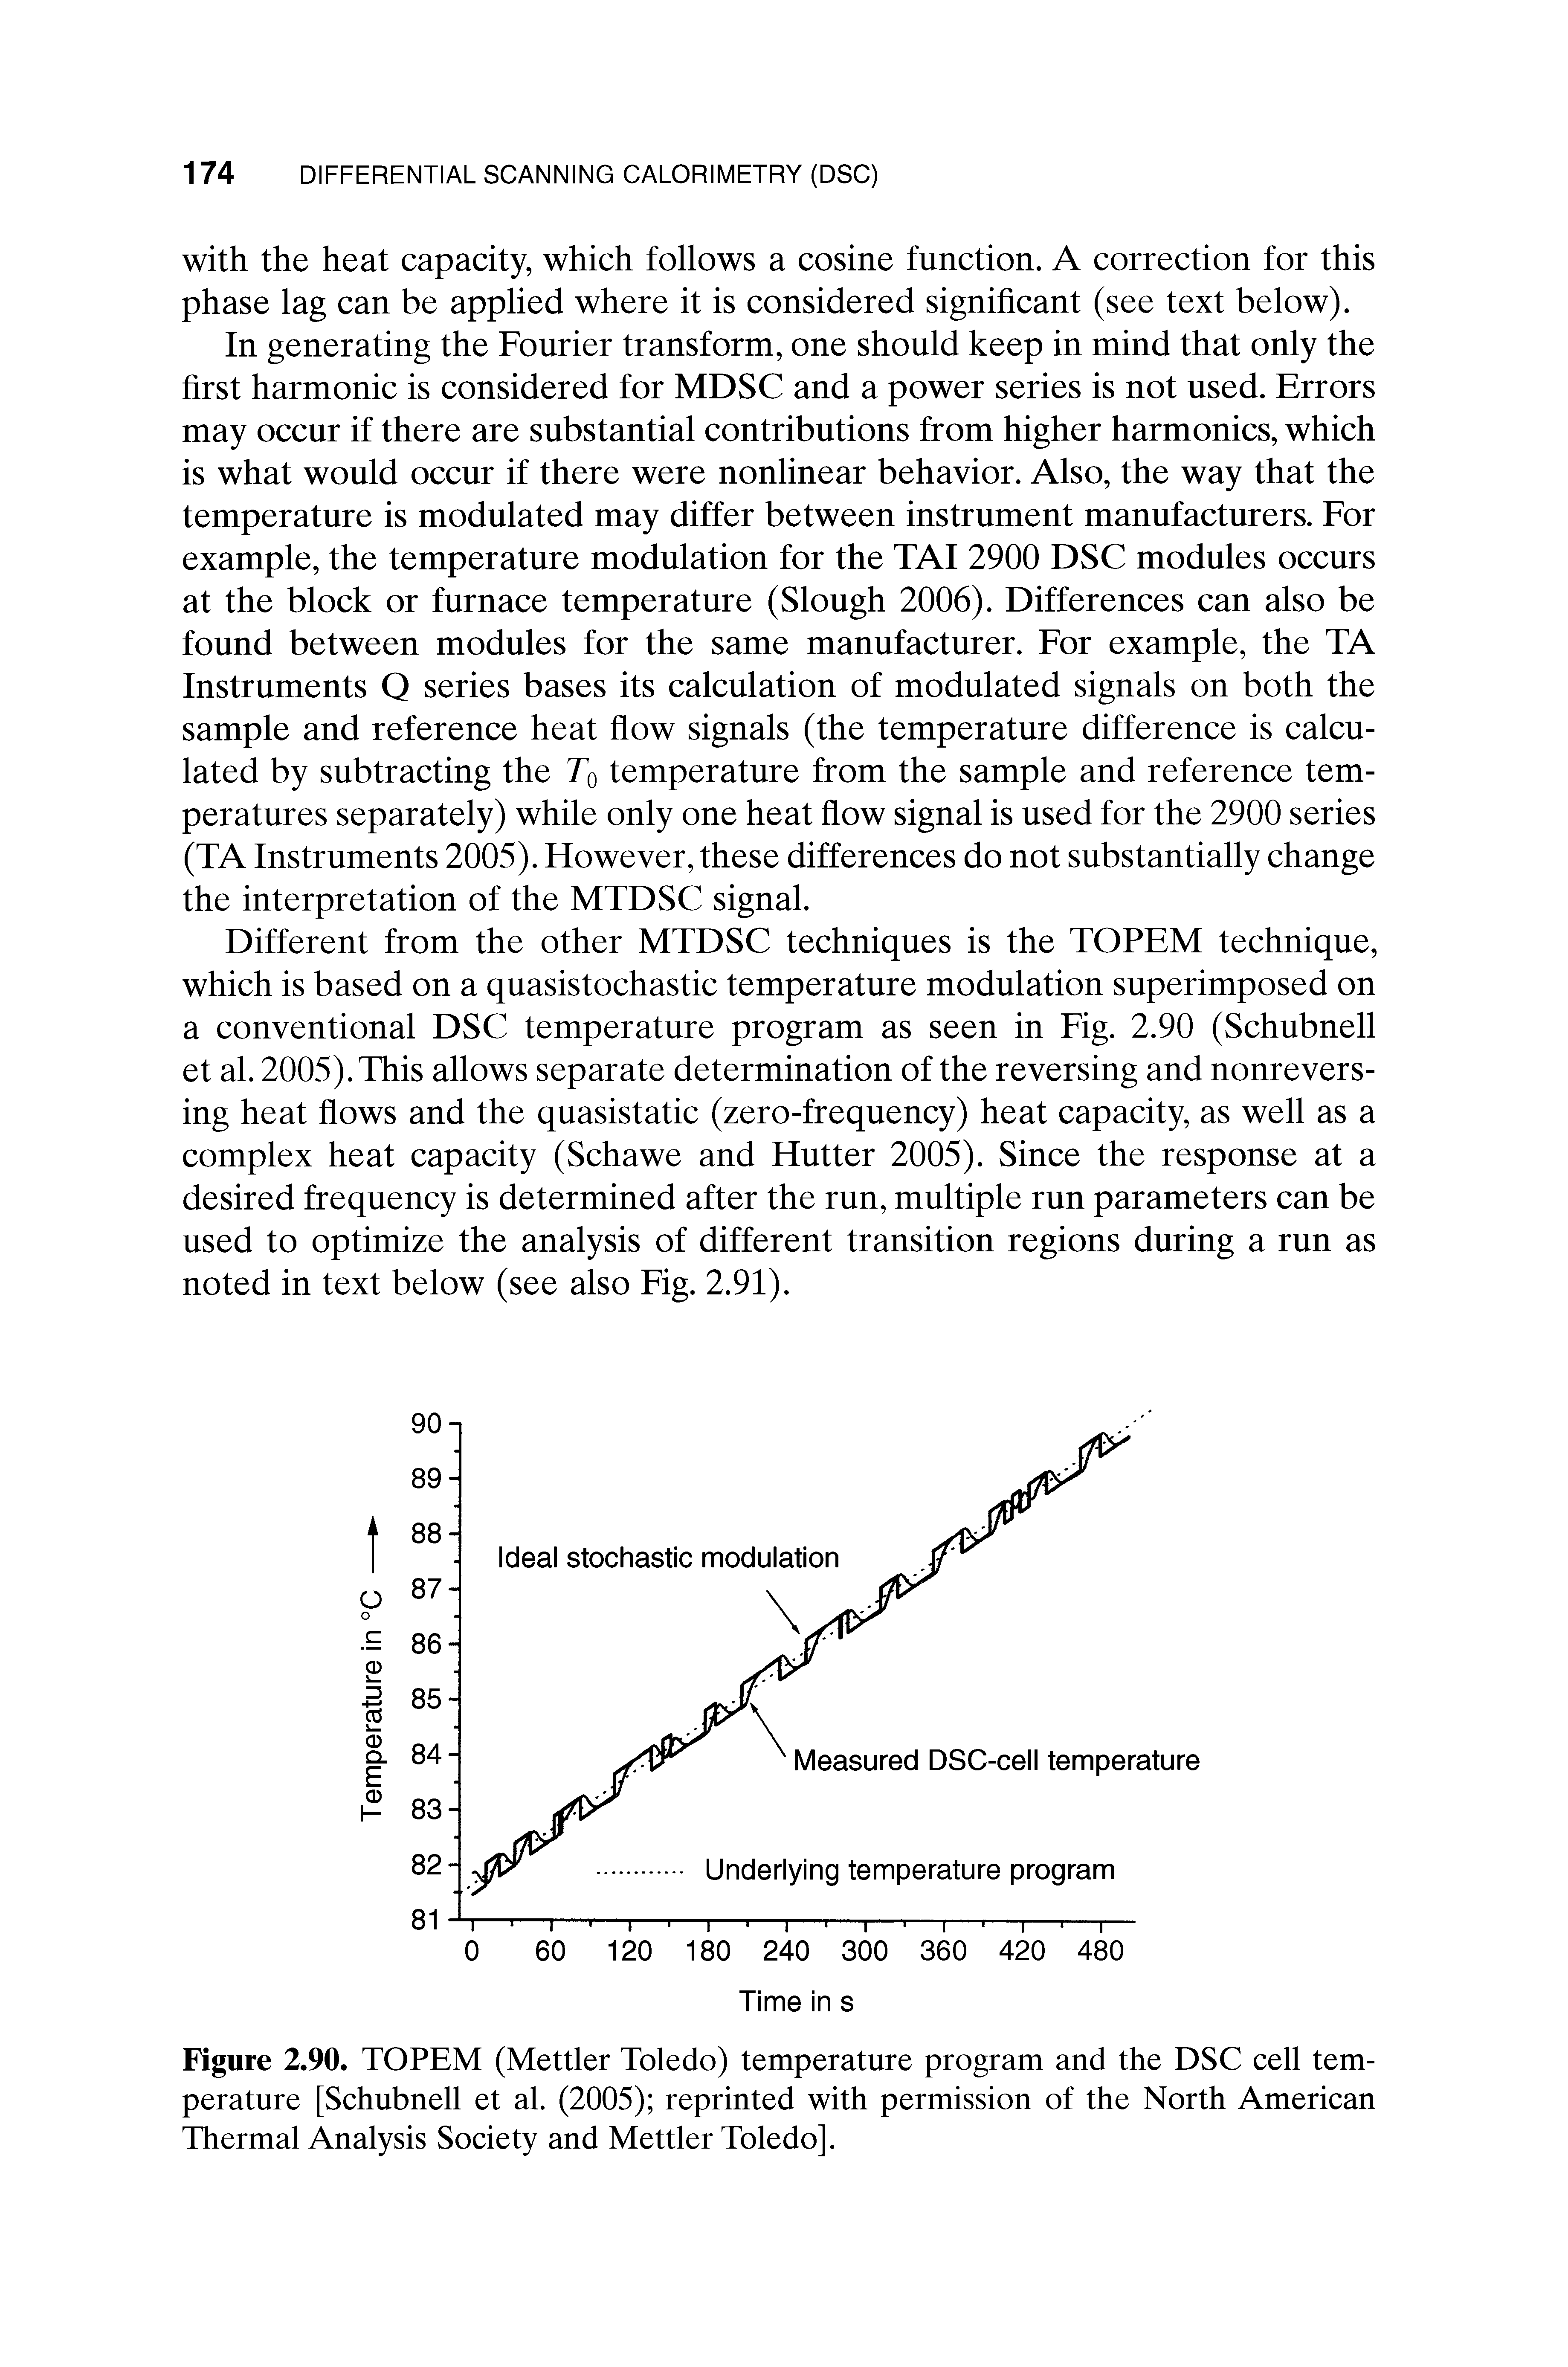 Figure 2.90. TOPEM (Mettler Toledo) temperature program and the DSC cell temperature [Schubnell et al. (2005) reprinted with permission of the North American Thermal Analysis Society and Mettler Toledo].